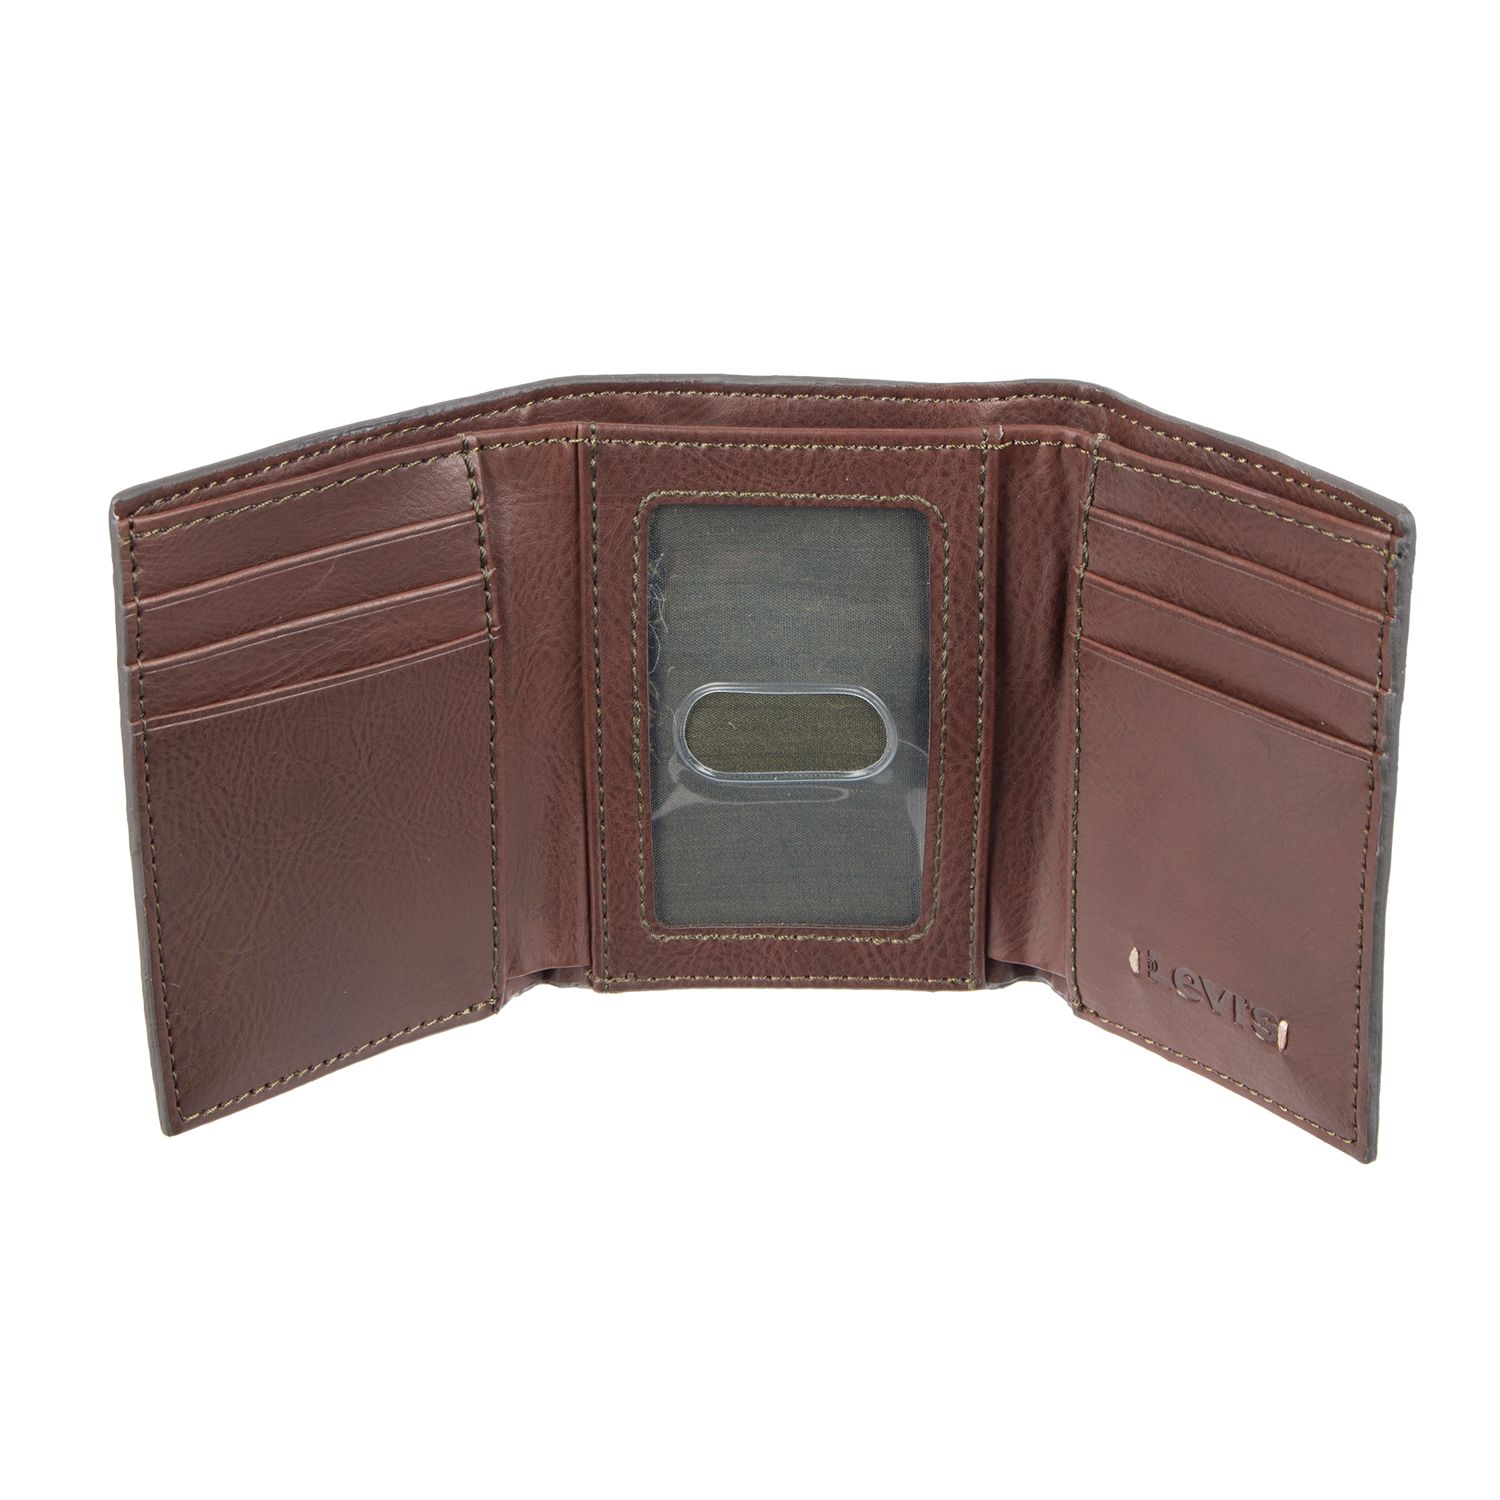 levis bifold leather wallet